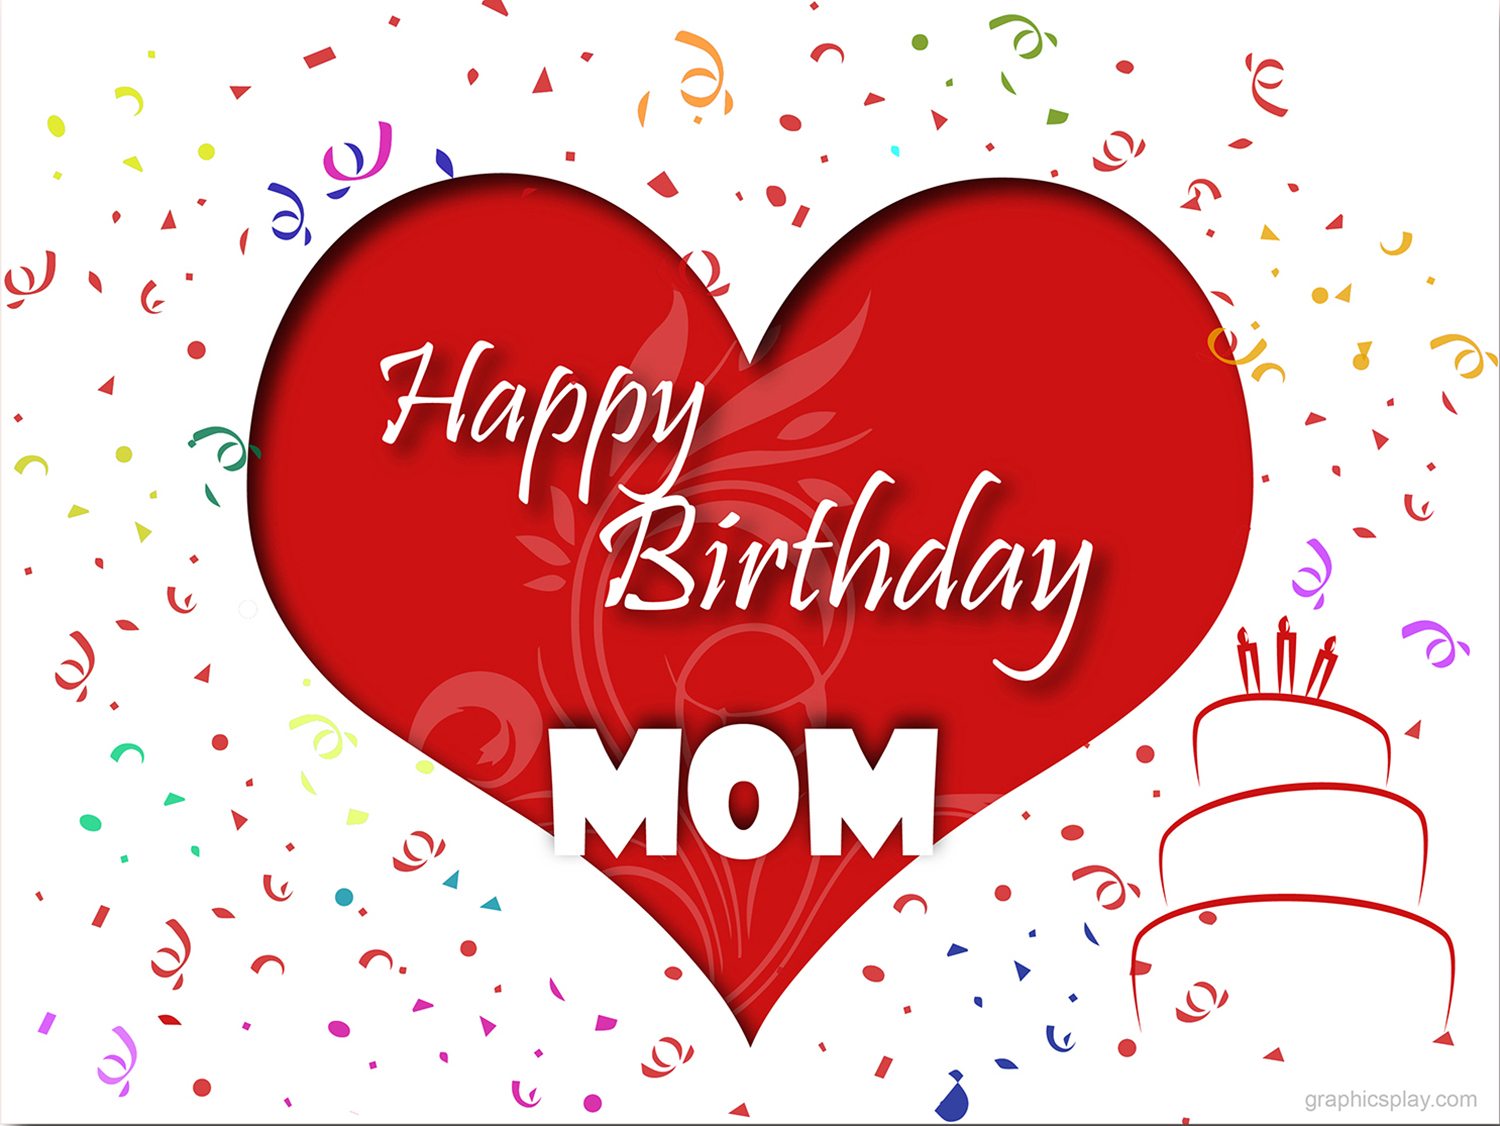 Download Happy Birthday Mom Greeting With Love - GraphicsPlay